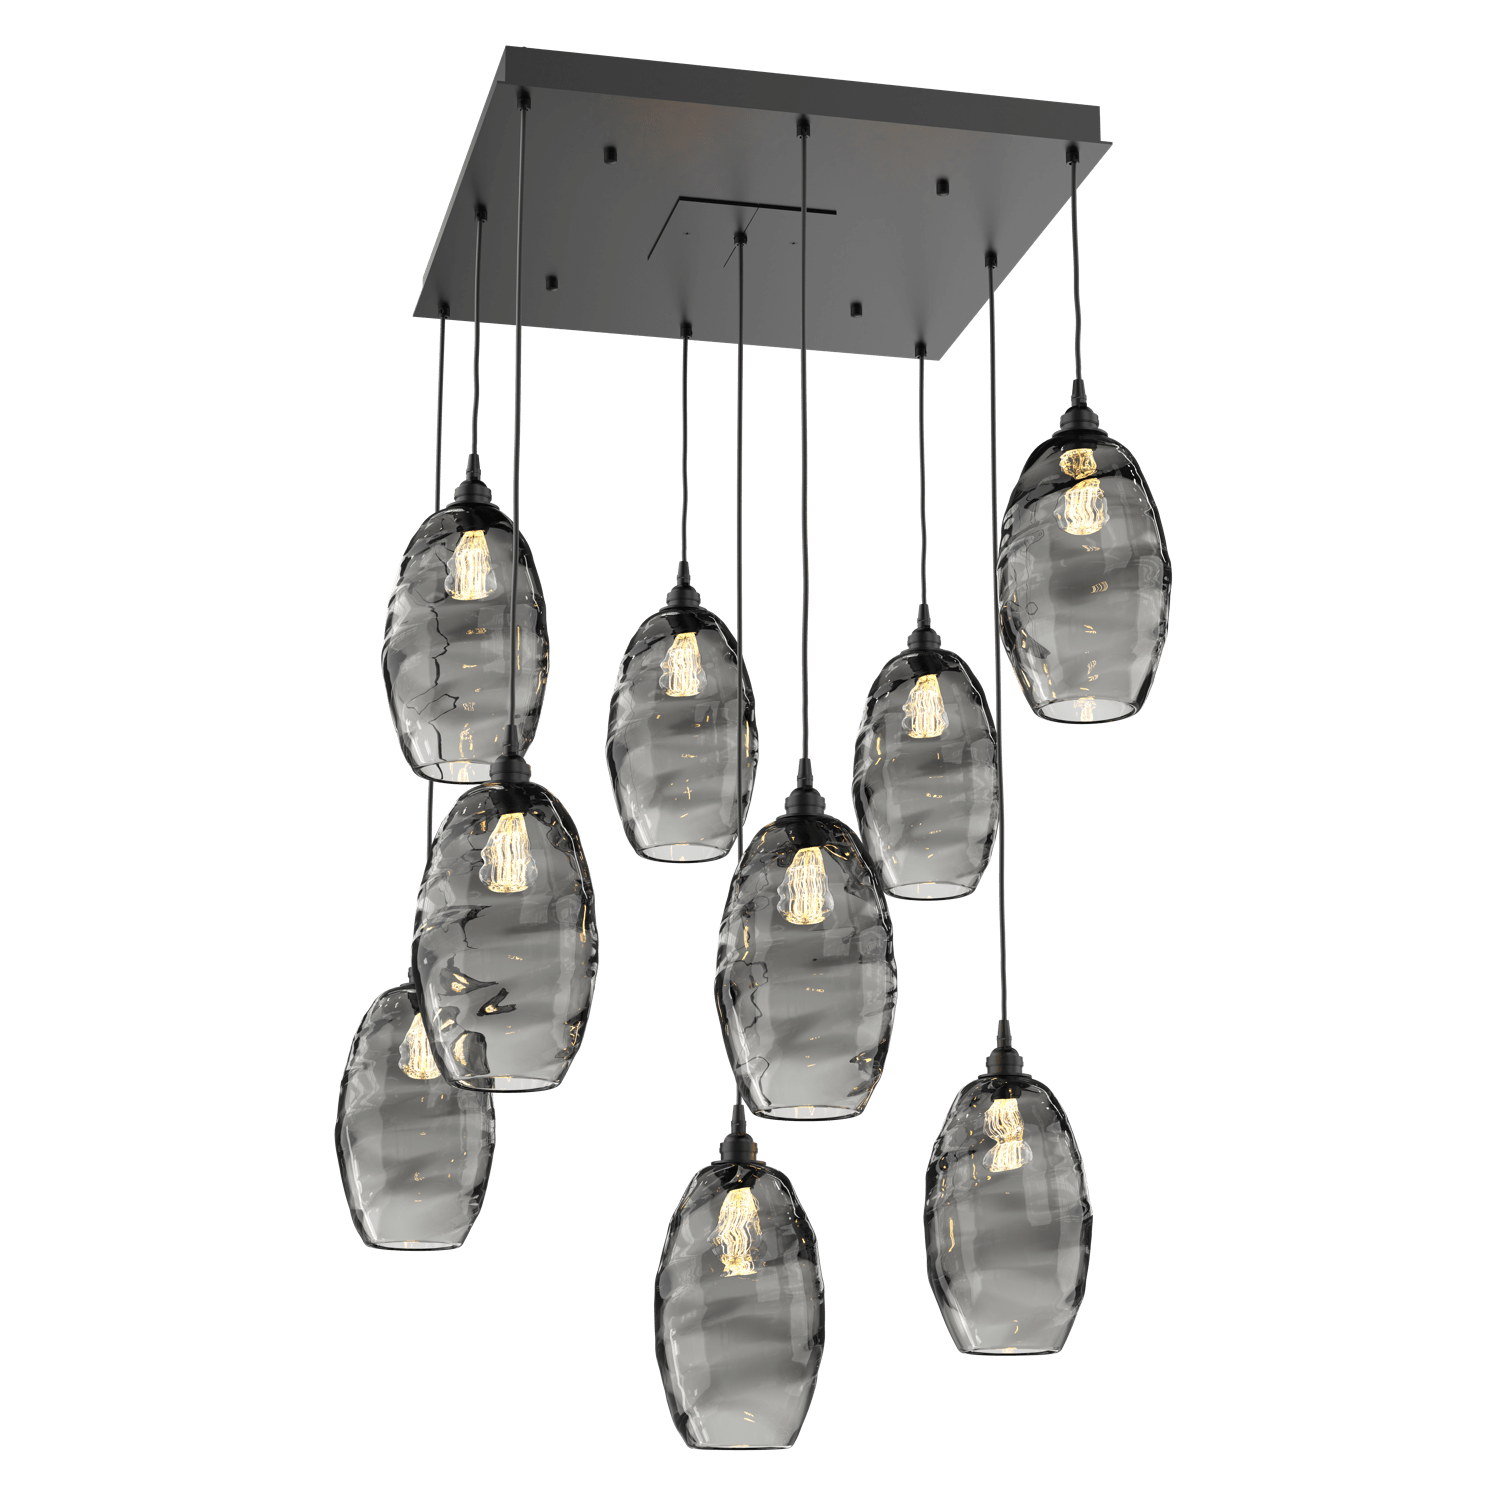 CHB0035-09-MB-OS-Hammerton-Studio-Optic-Blown-Glass-Elisse-9-light-square-pendant-chandelier-with-matte-black-finish-and-optic-smoke-blown-glass-shades-and-incandescent-lamping